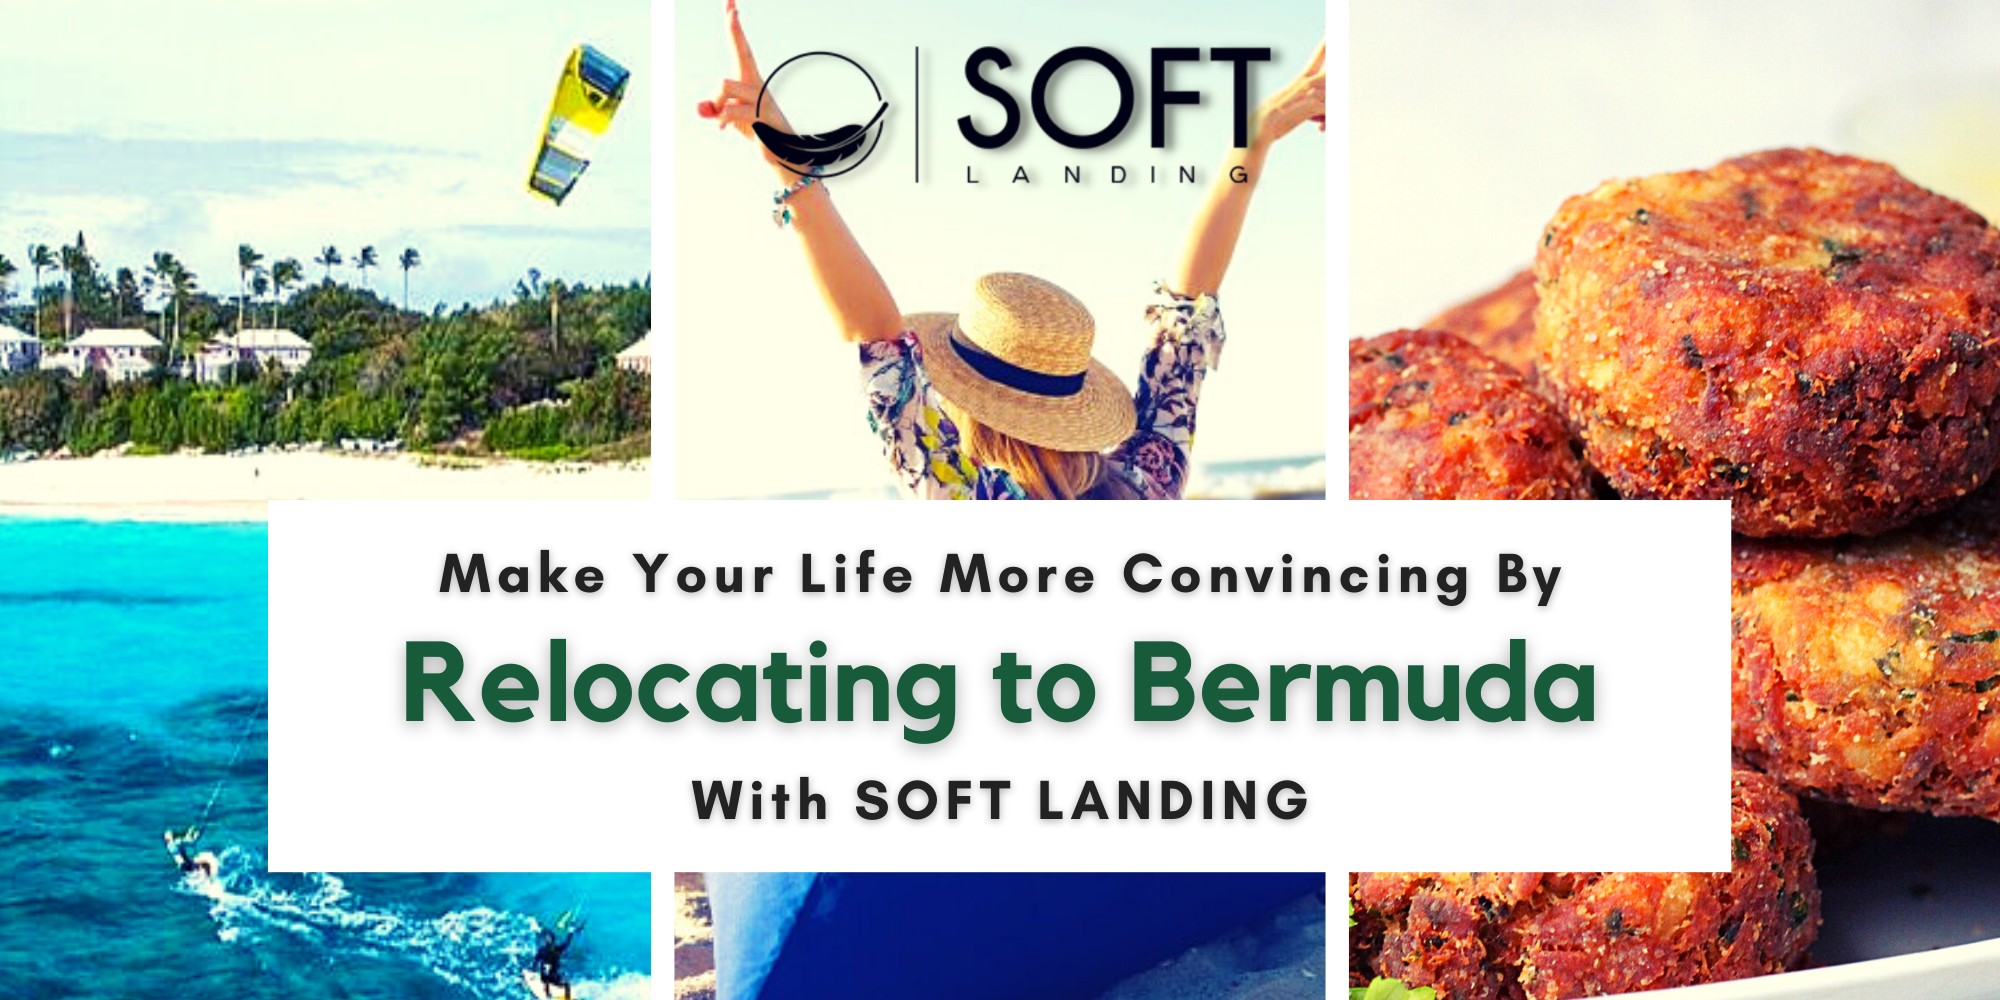 Soft Landing- The Top Relocation Agency in Bermuda